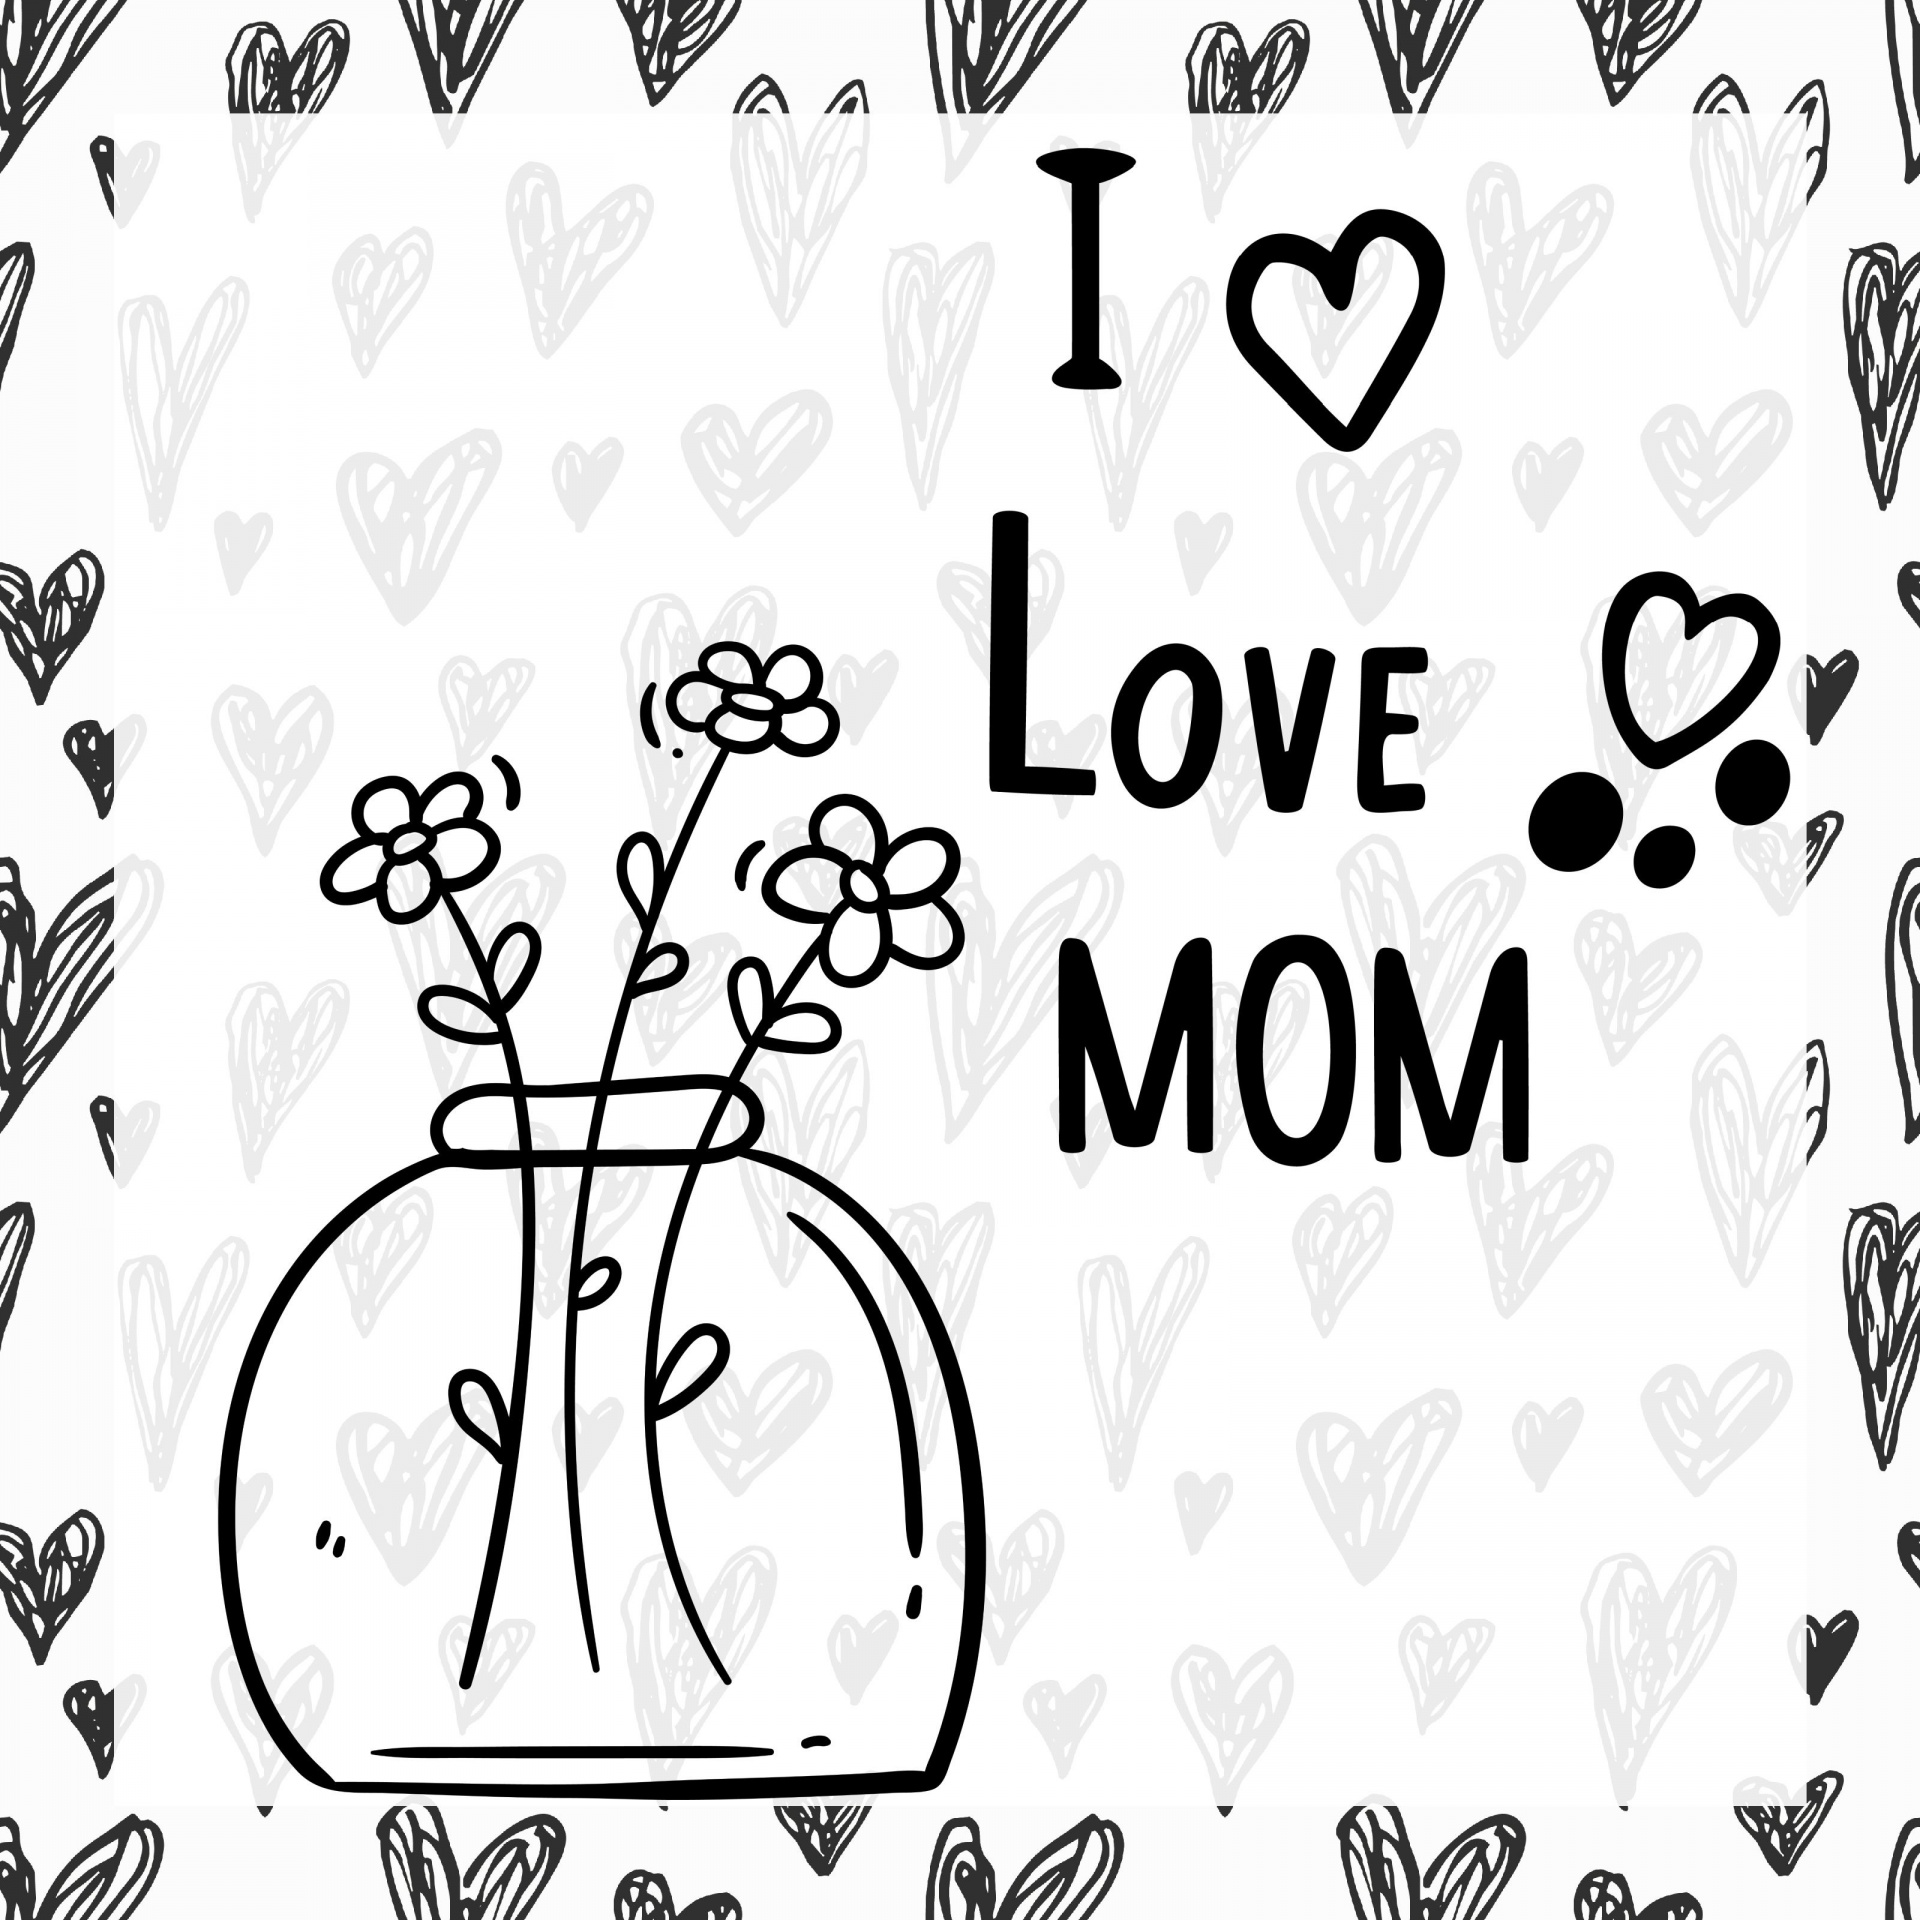 buy-personalised-mother-s-day-card-for-my-amazing-for-gbp-2-79-card